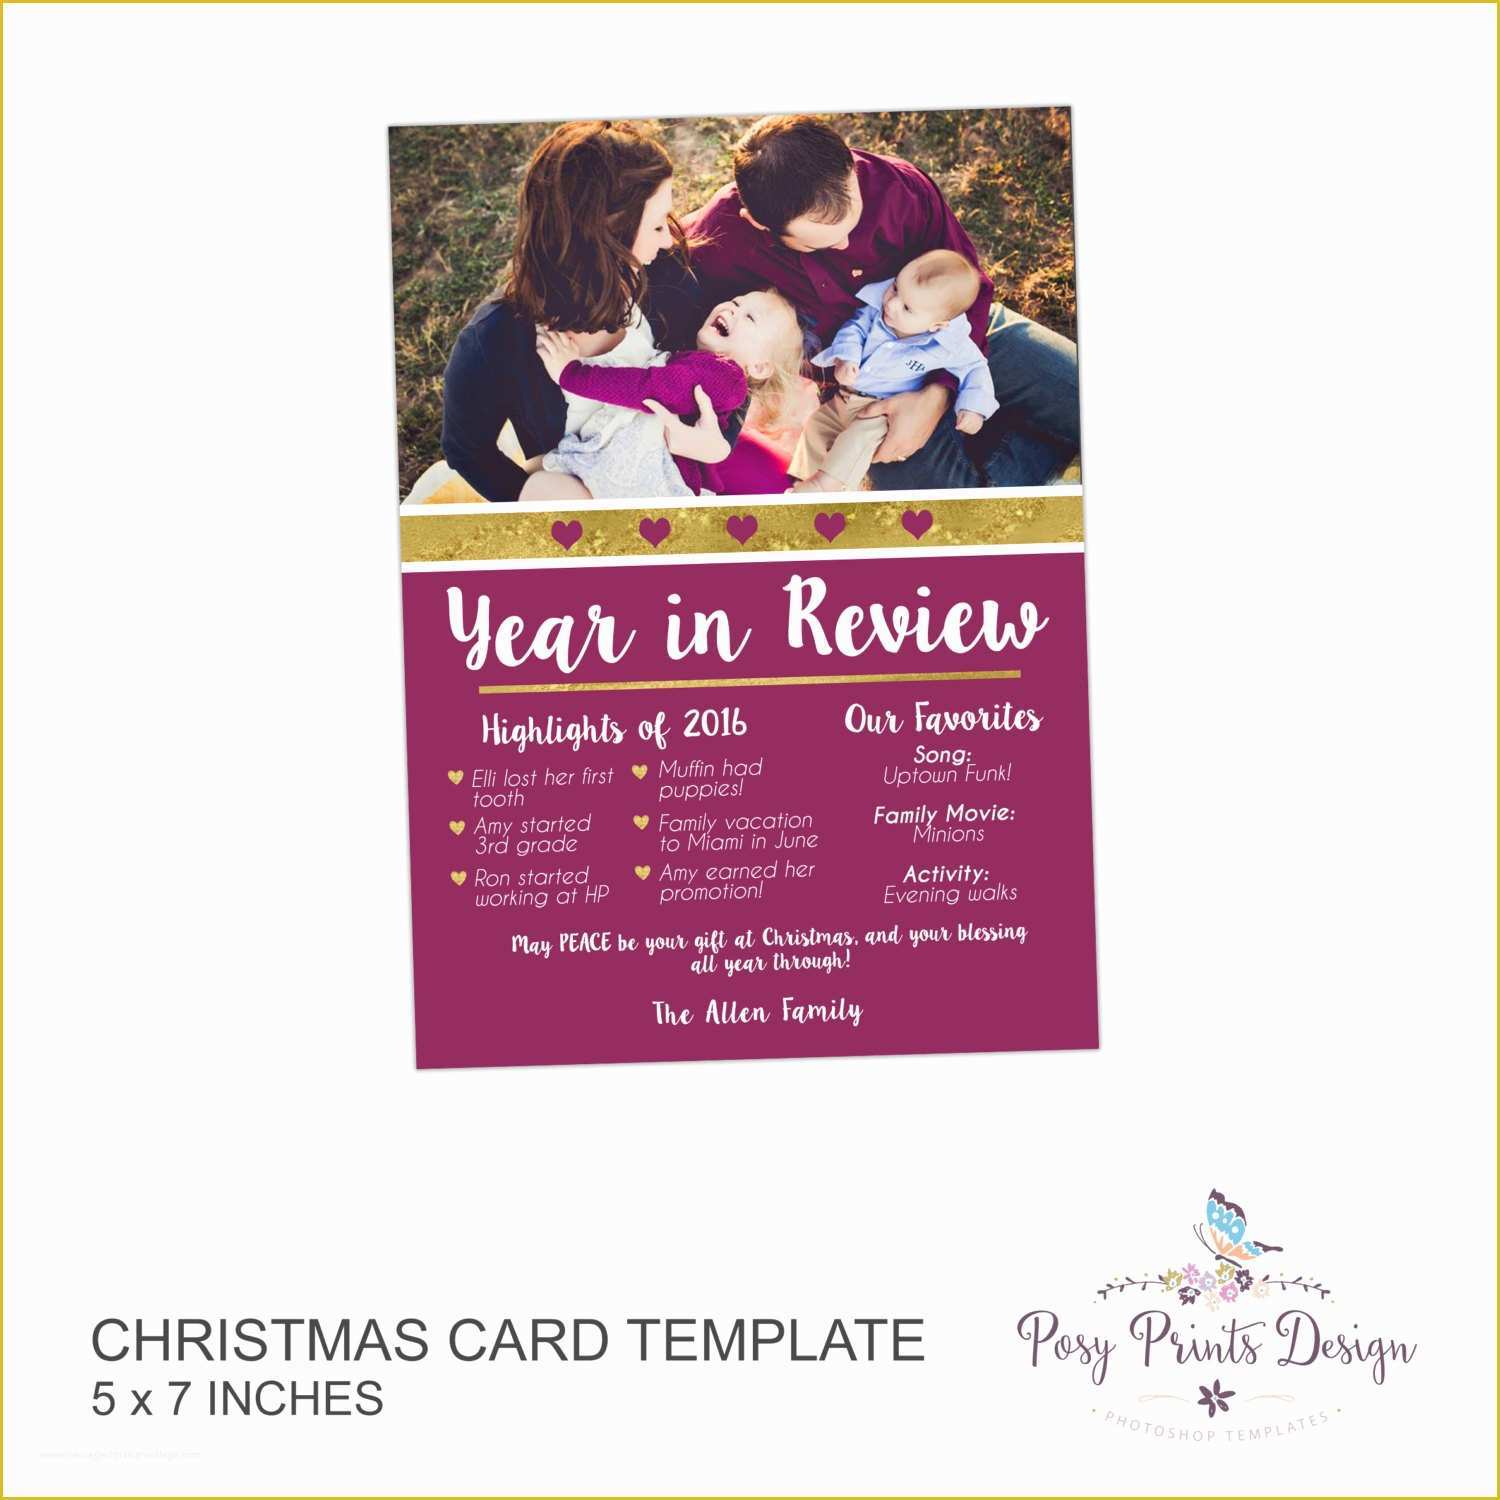 Year In Review Template Free Of Year In Review Christmas Card Template 5x7 Card